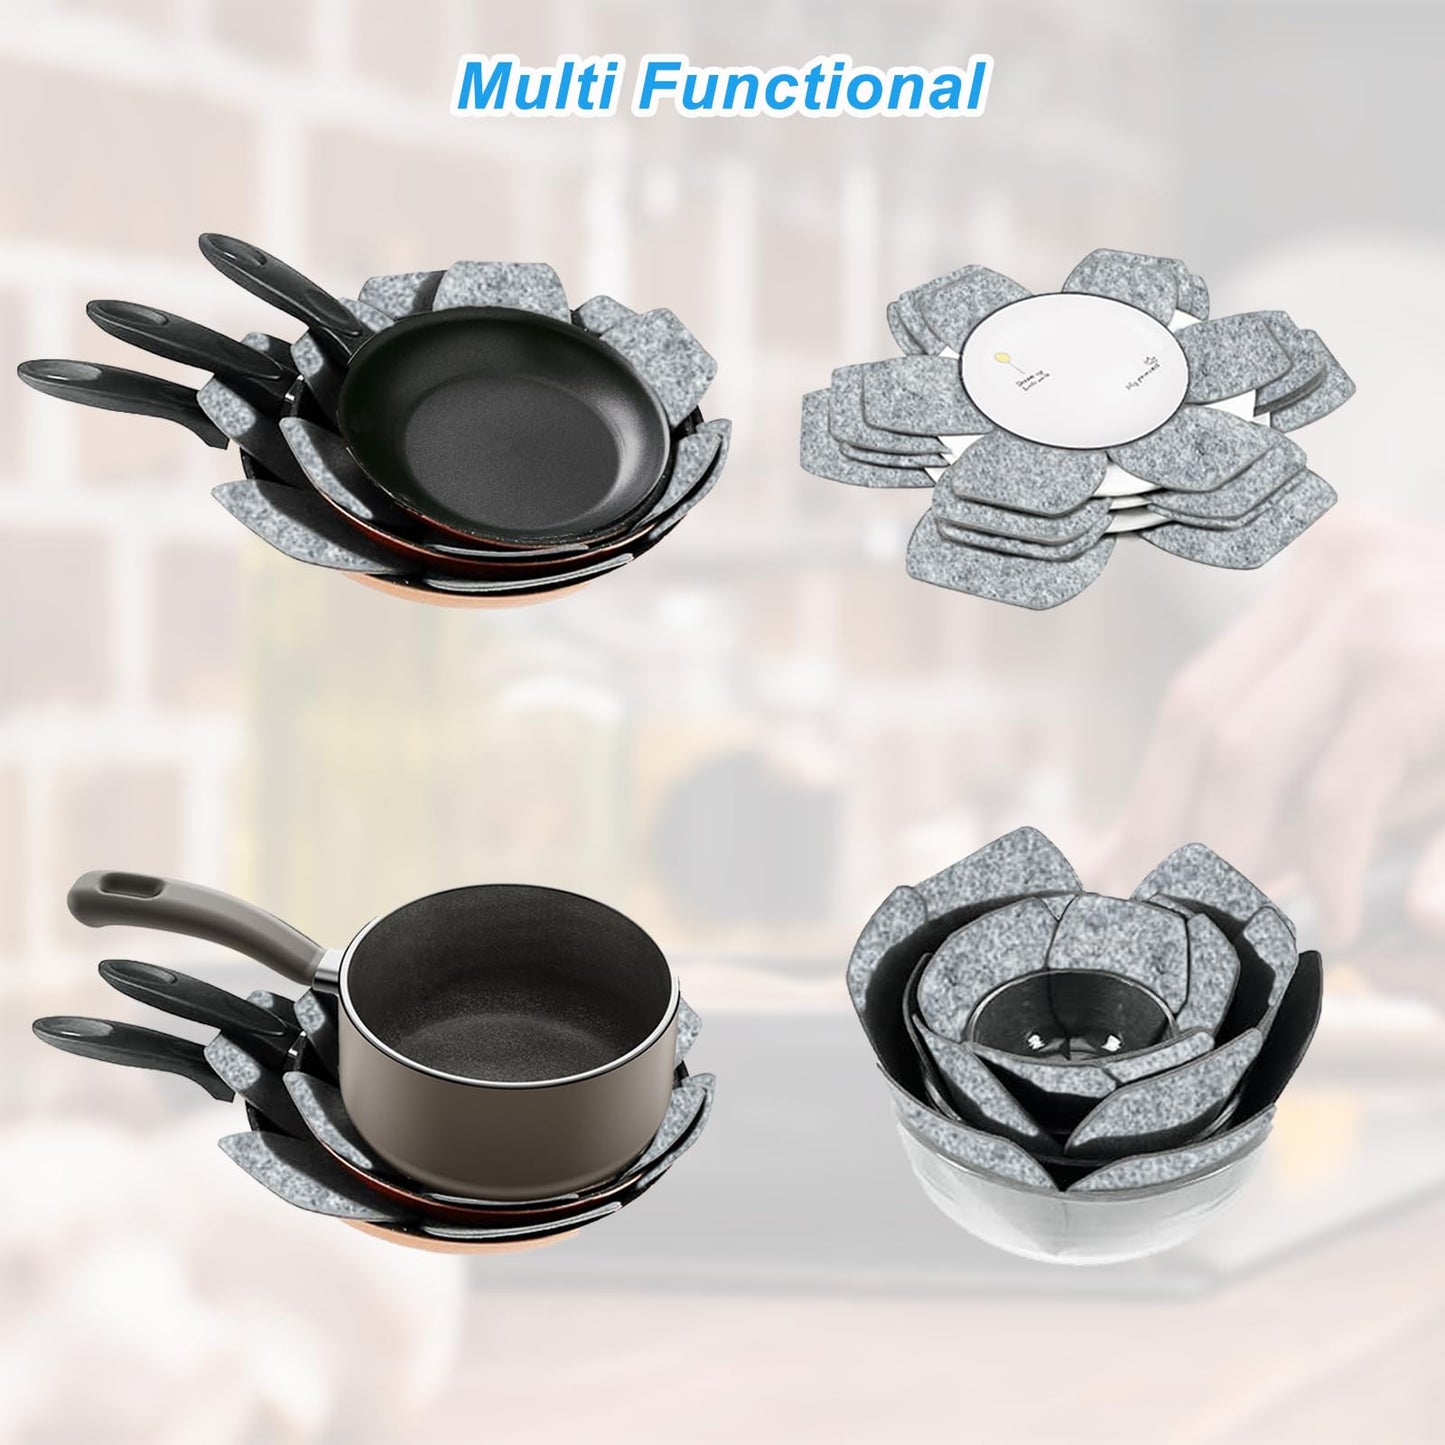 Pot and Pan Protectors, 6 Pack Pan Protectors in 3 Sizes, Pot Separator for Stacking, Anti-Slip Pan/Pot Dividers to Avoid Stratching or Marring, Protecting Pads for Glass/Ceramic Plates and Cookwares